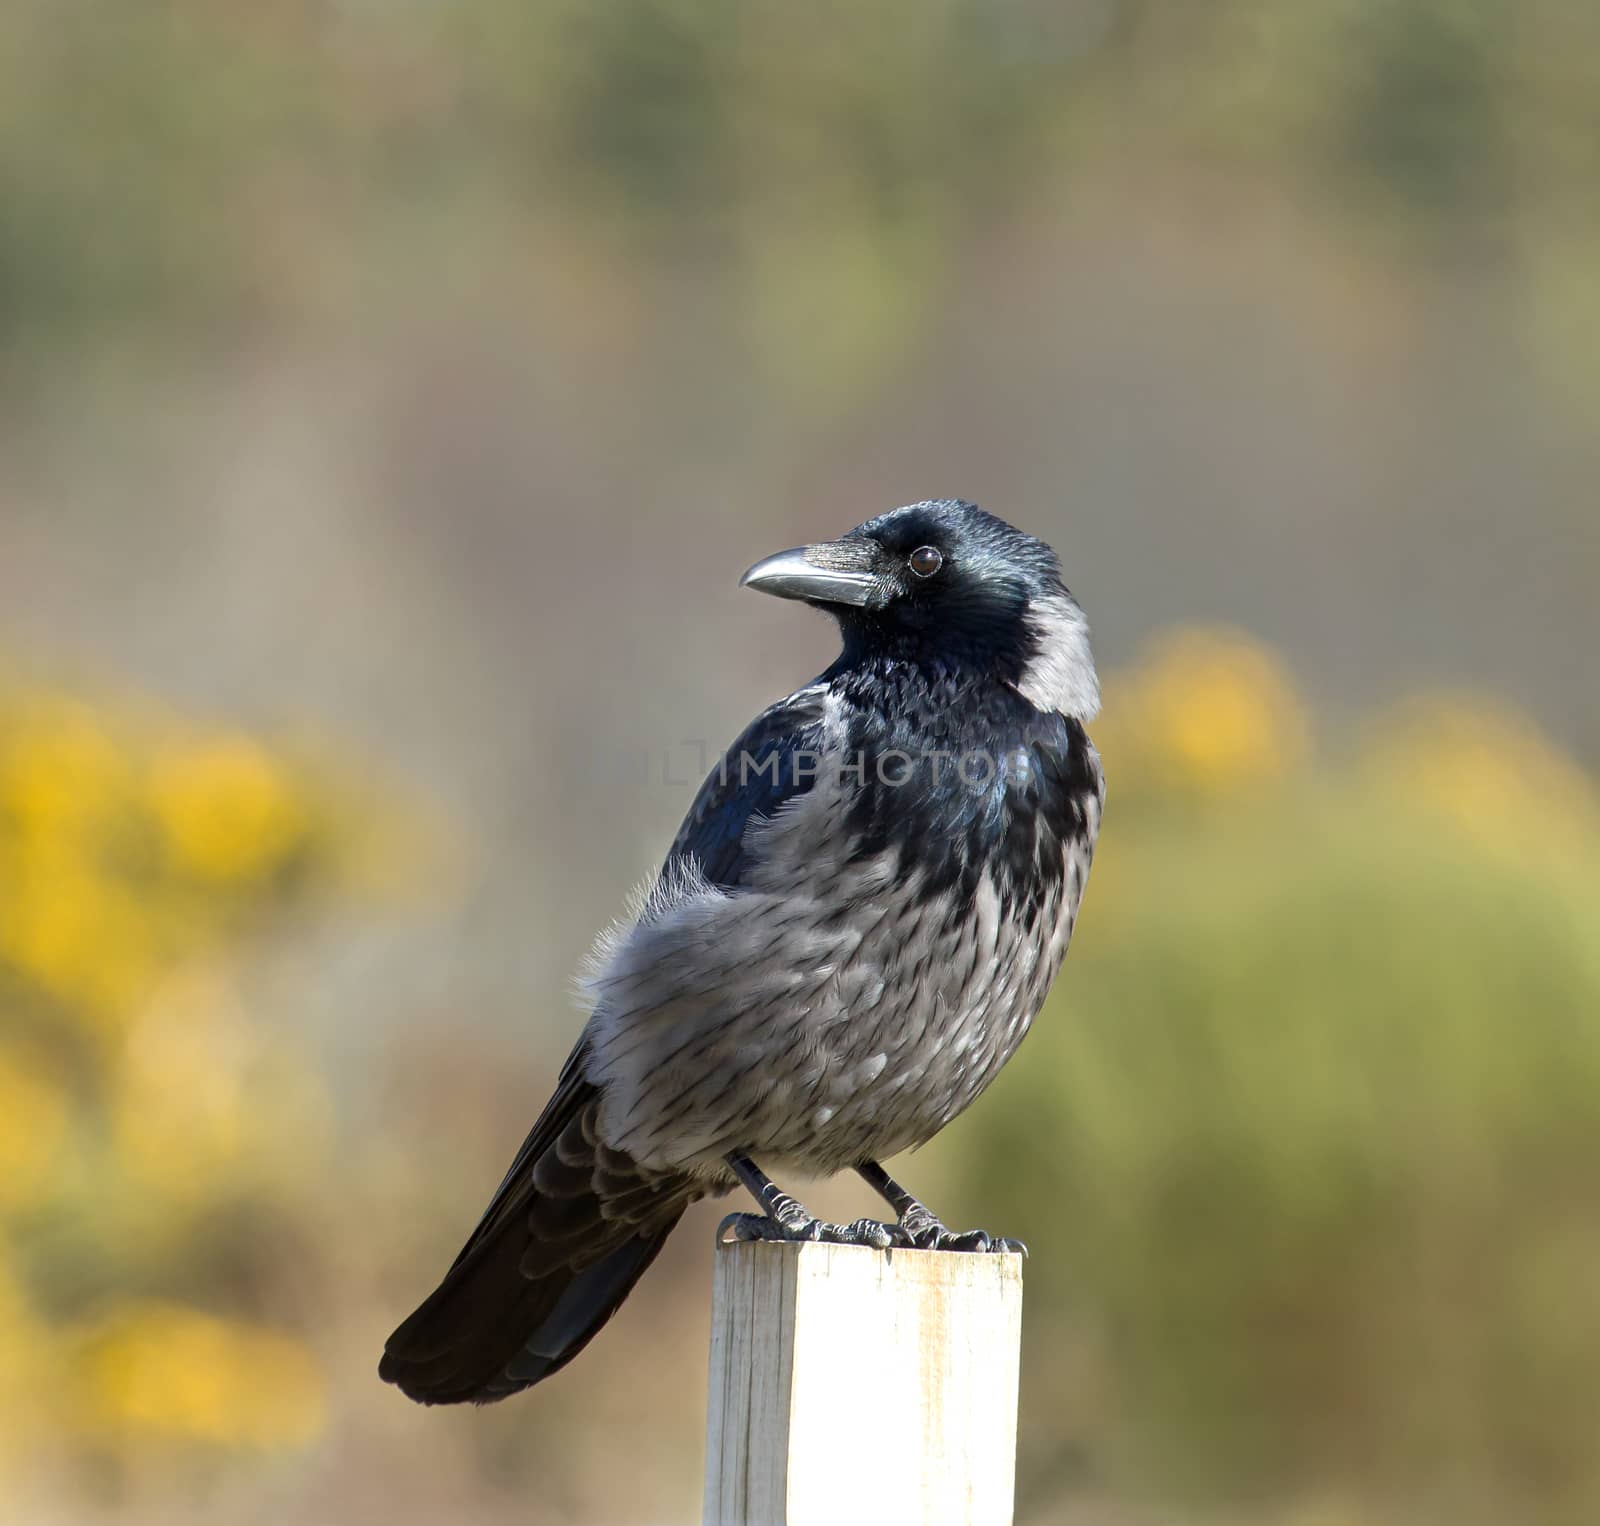 Hybrid Carrion and Hooded Crow seen at Culloden Battlefield in Scotland.